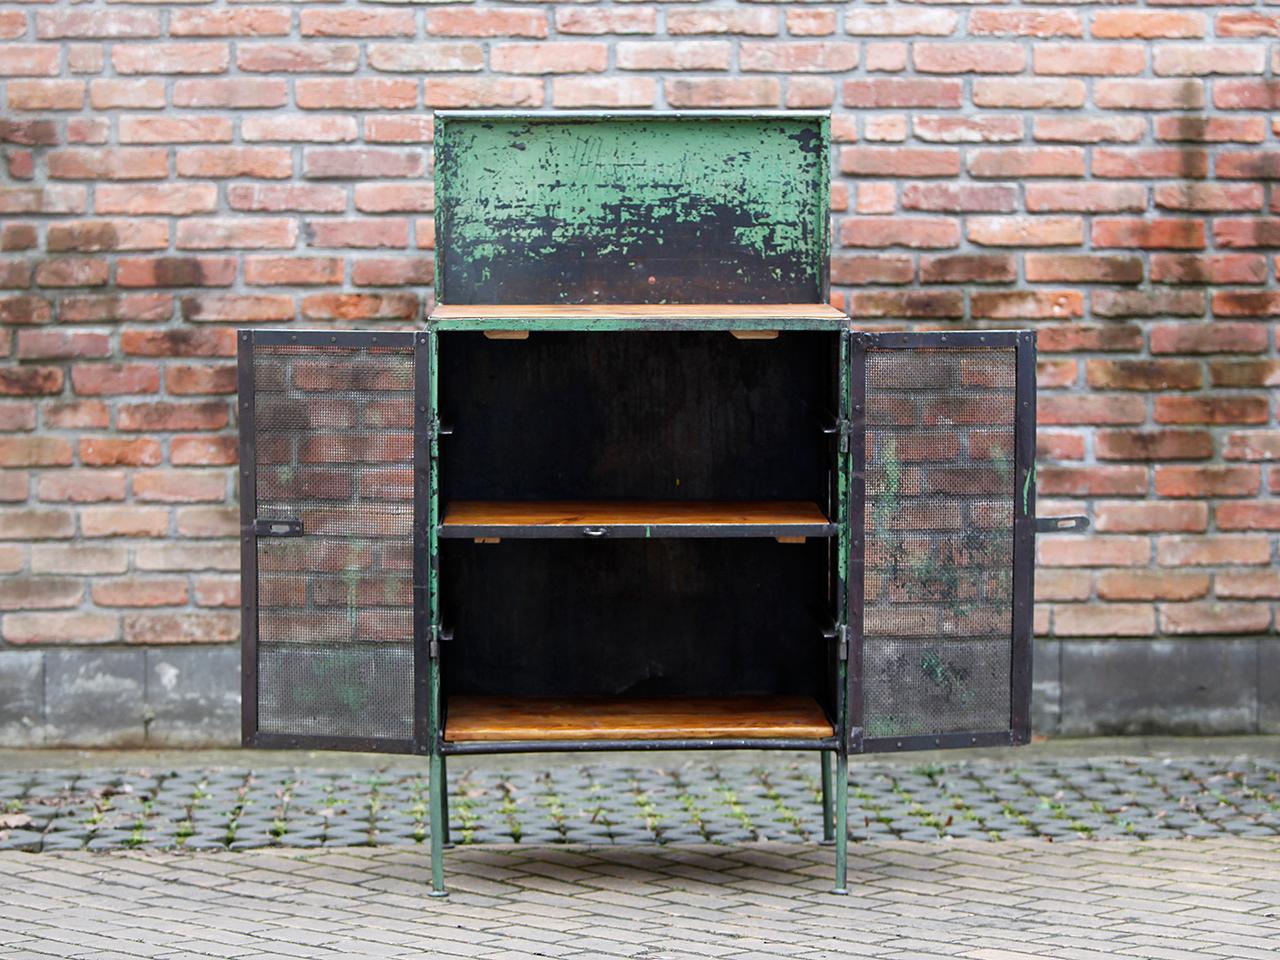 This painted steel sheet cabinet comes from a factory hall of the Czech company Tesla in Roznov. It was completely cleaned and restored. Good vintage condition with patina.